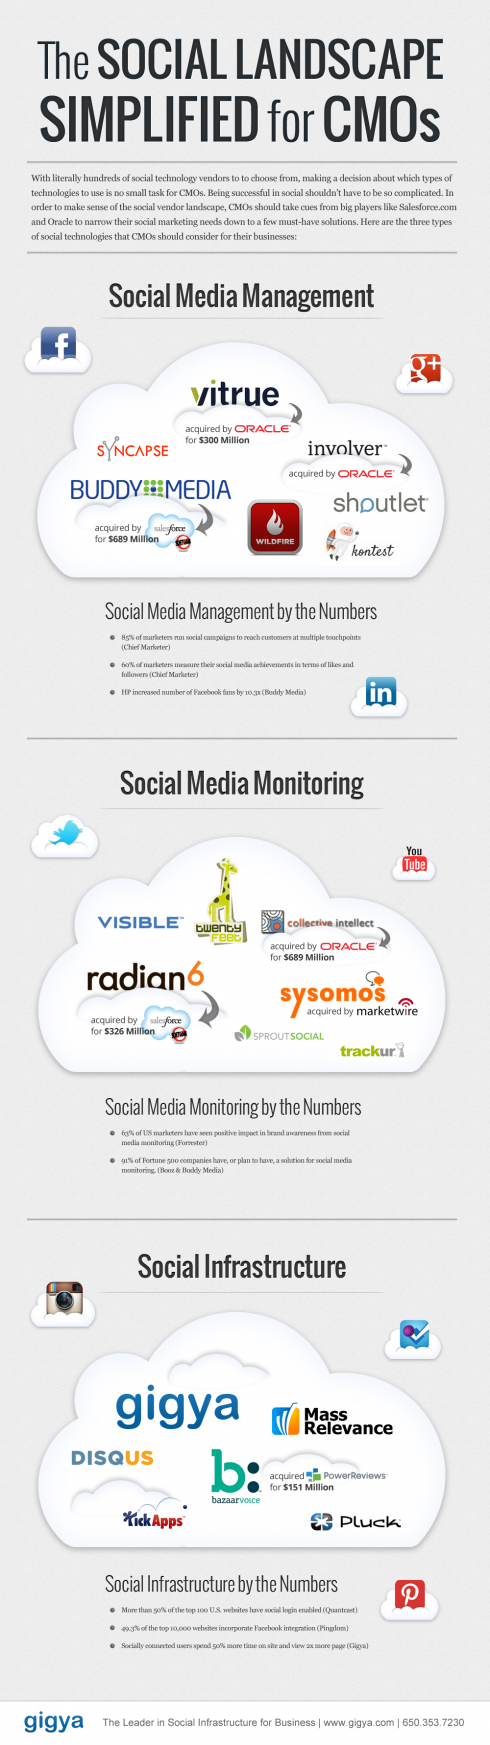 Infographic: The Social Landscape Simplified for CMOs